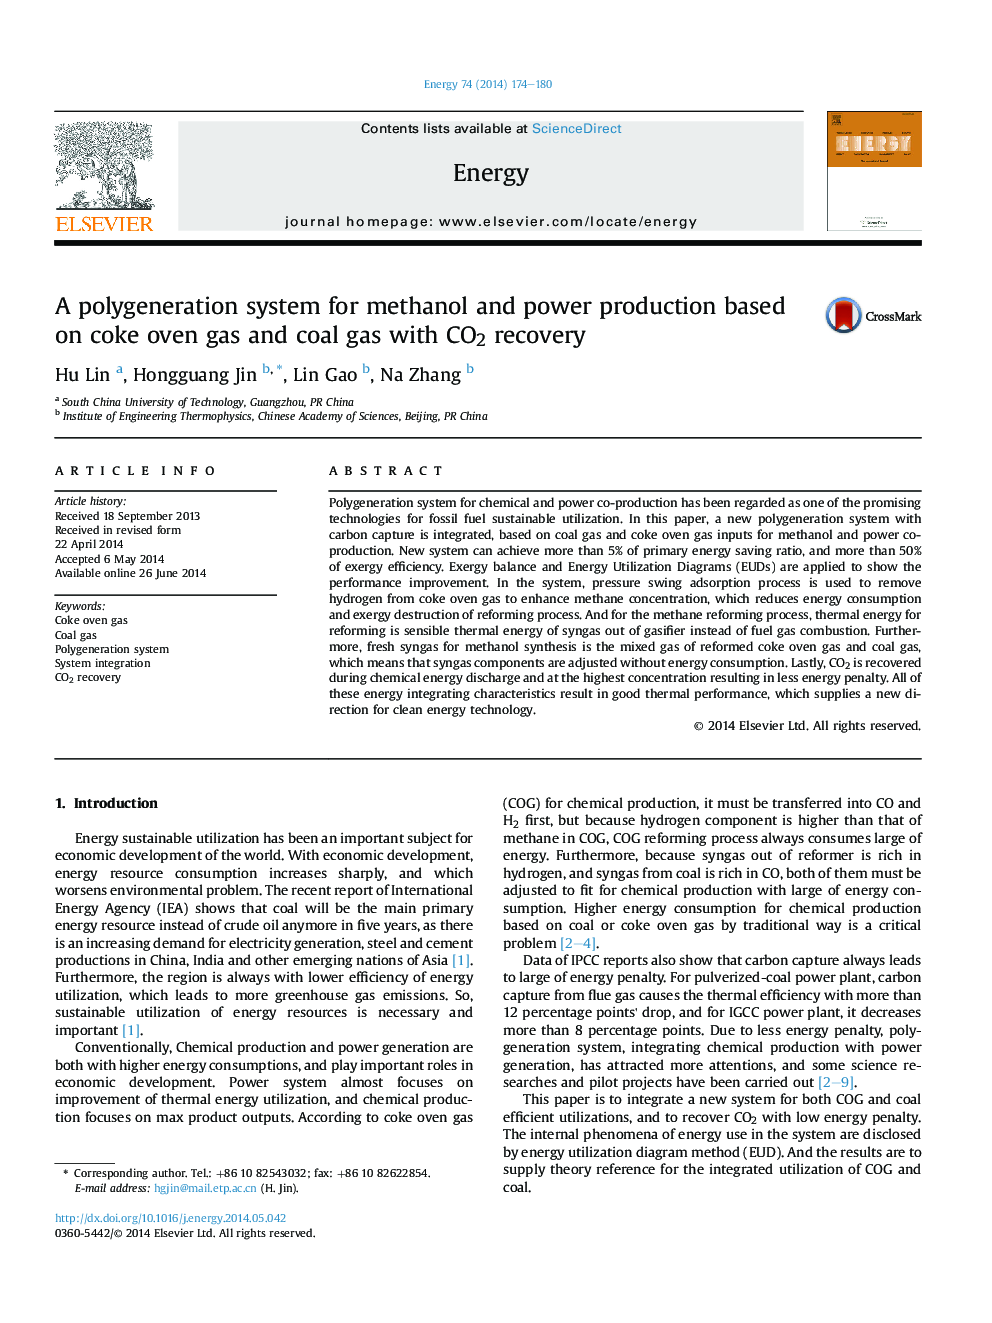 A polygeneration system for methanol and power production based on coke oven gas and coal gas with CO2 recovery